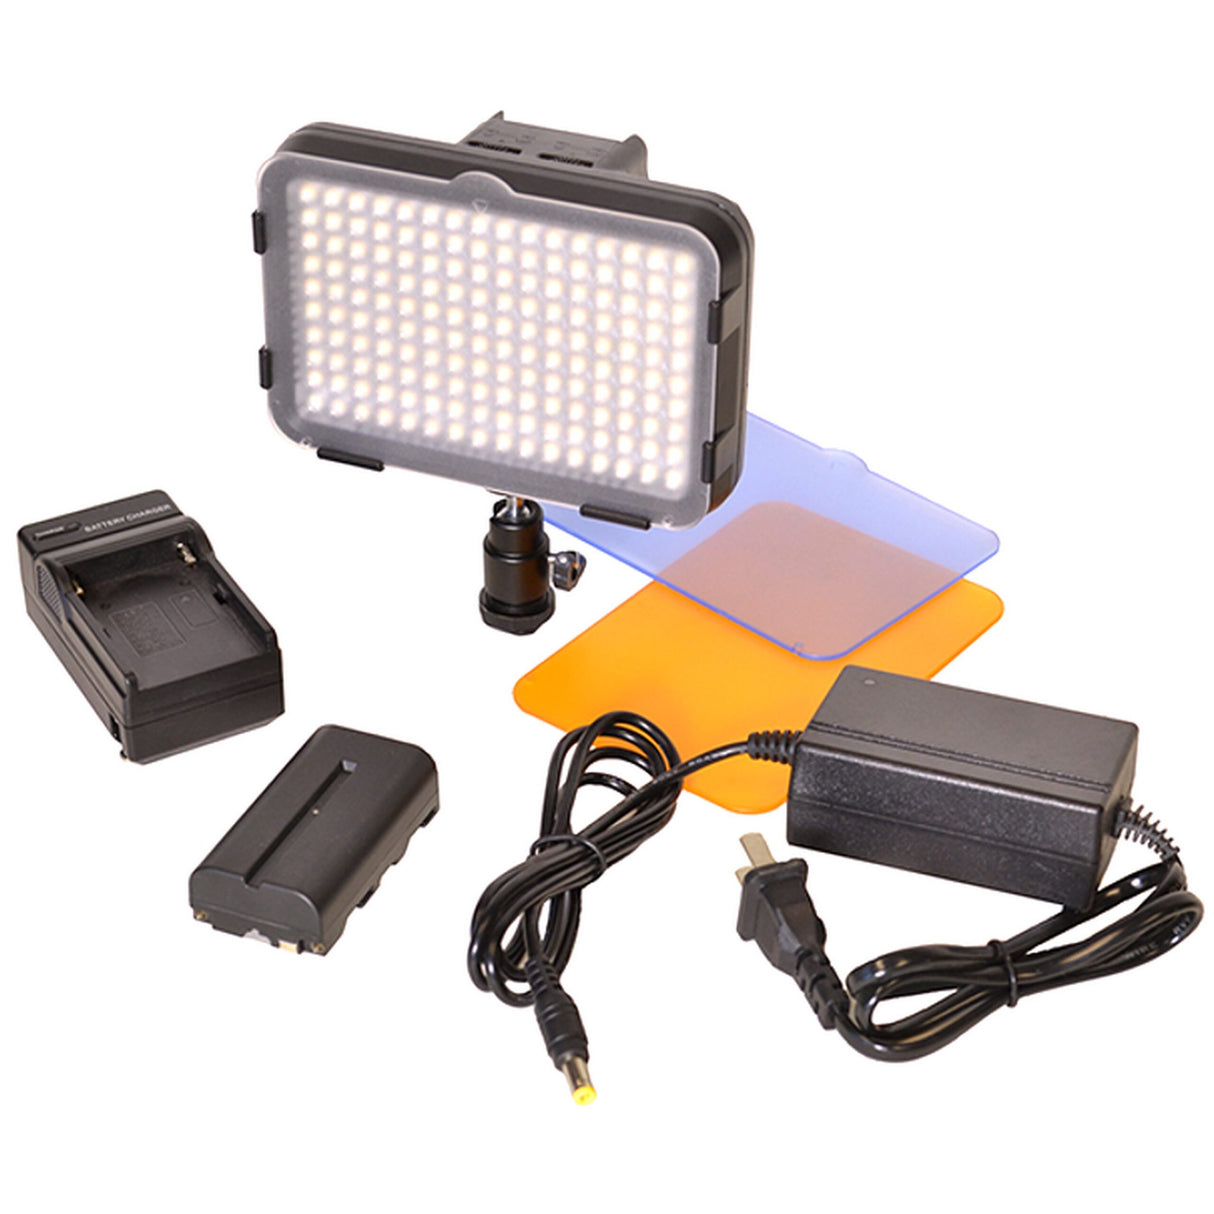 Bescor XT160M1 Bi-Color LED On-Camera Light with Battery, Charger and AC Adapter